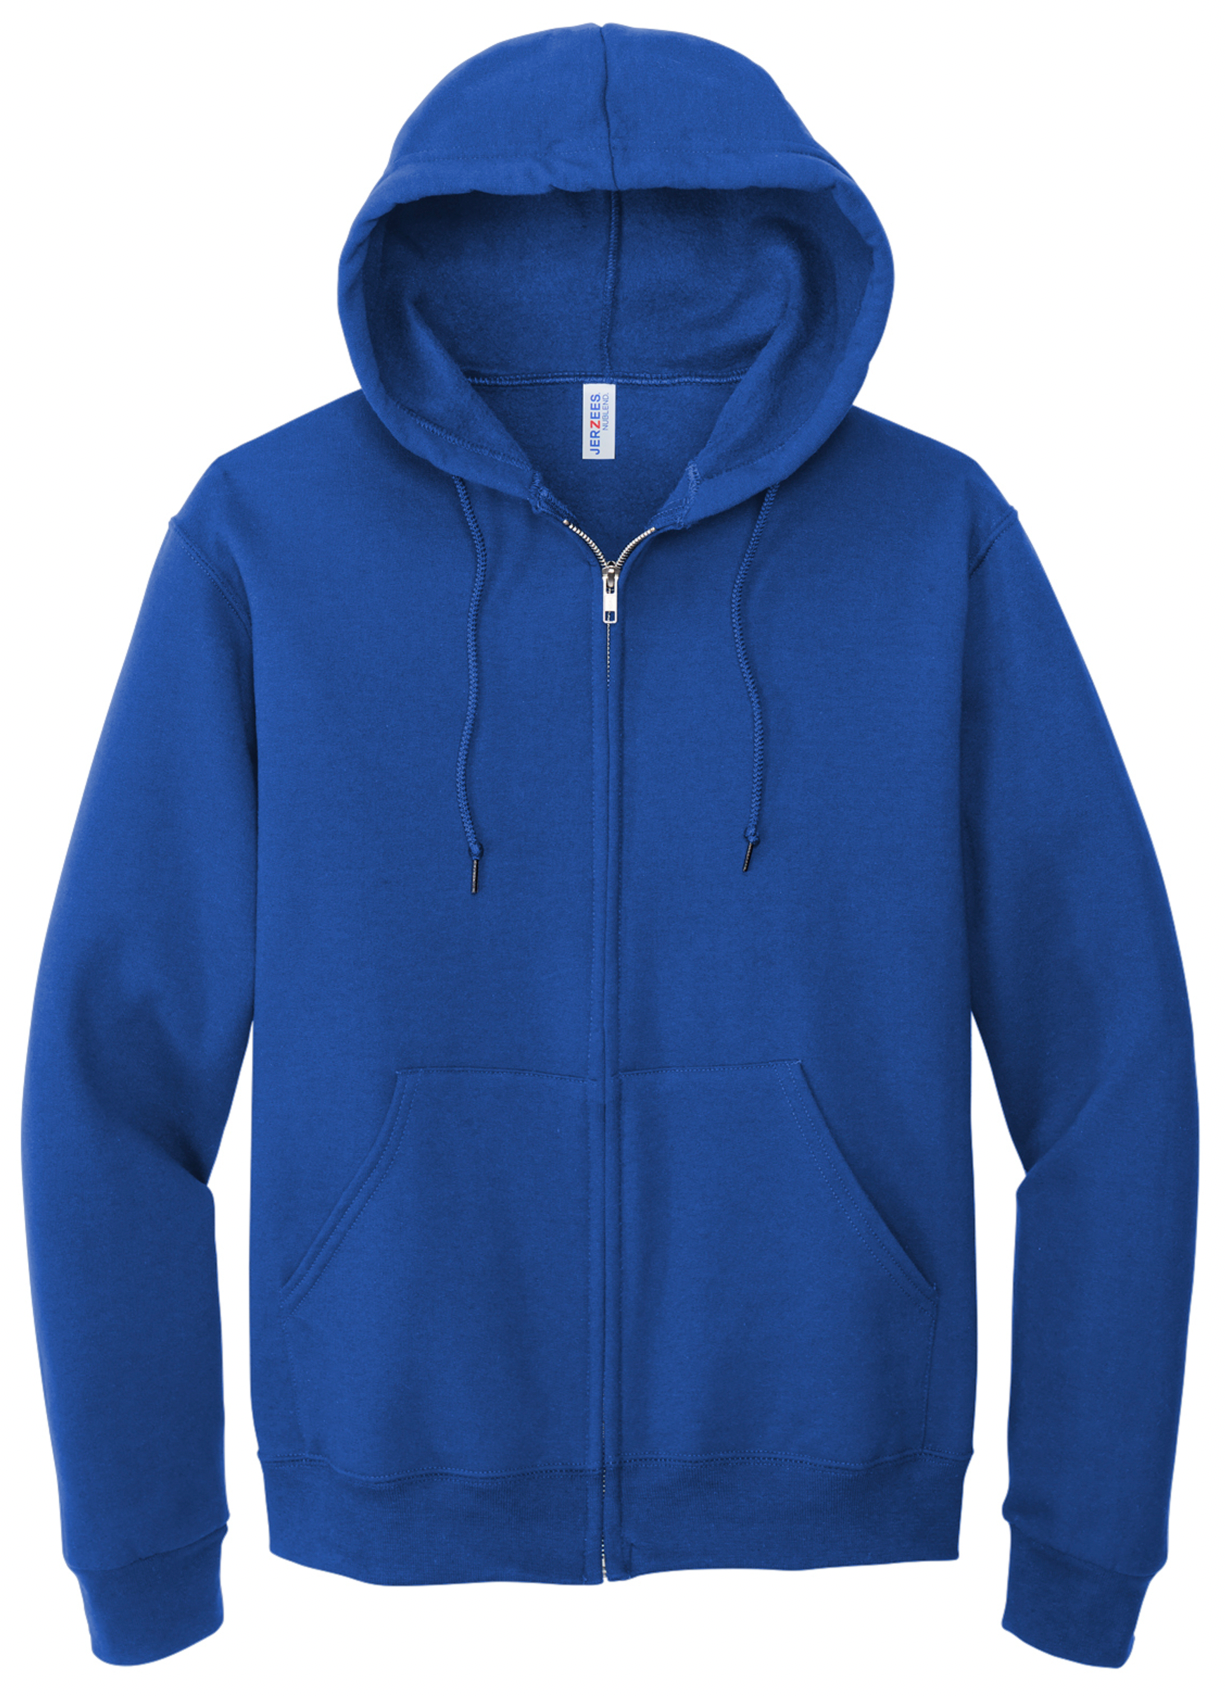 Mary Hill - Integrated Services Full-Zip Sweatshirt